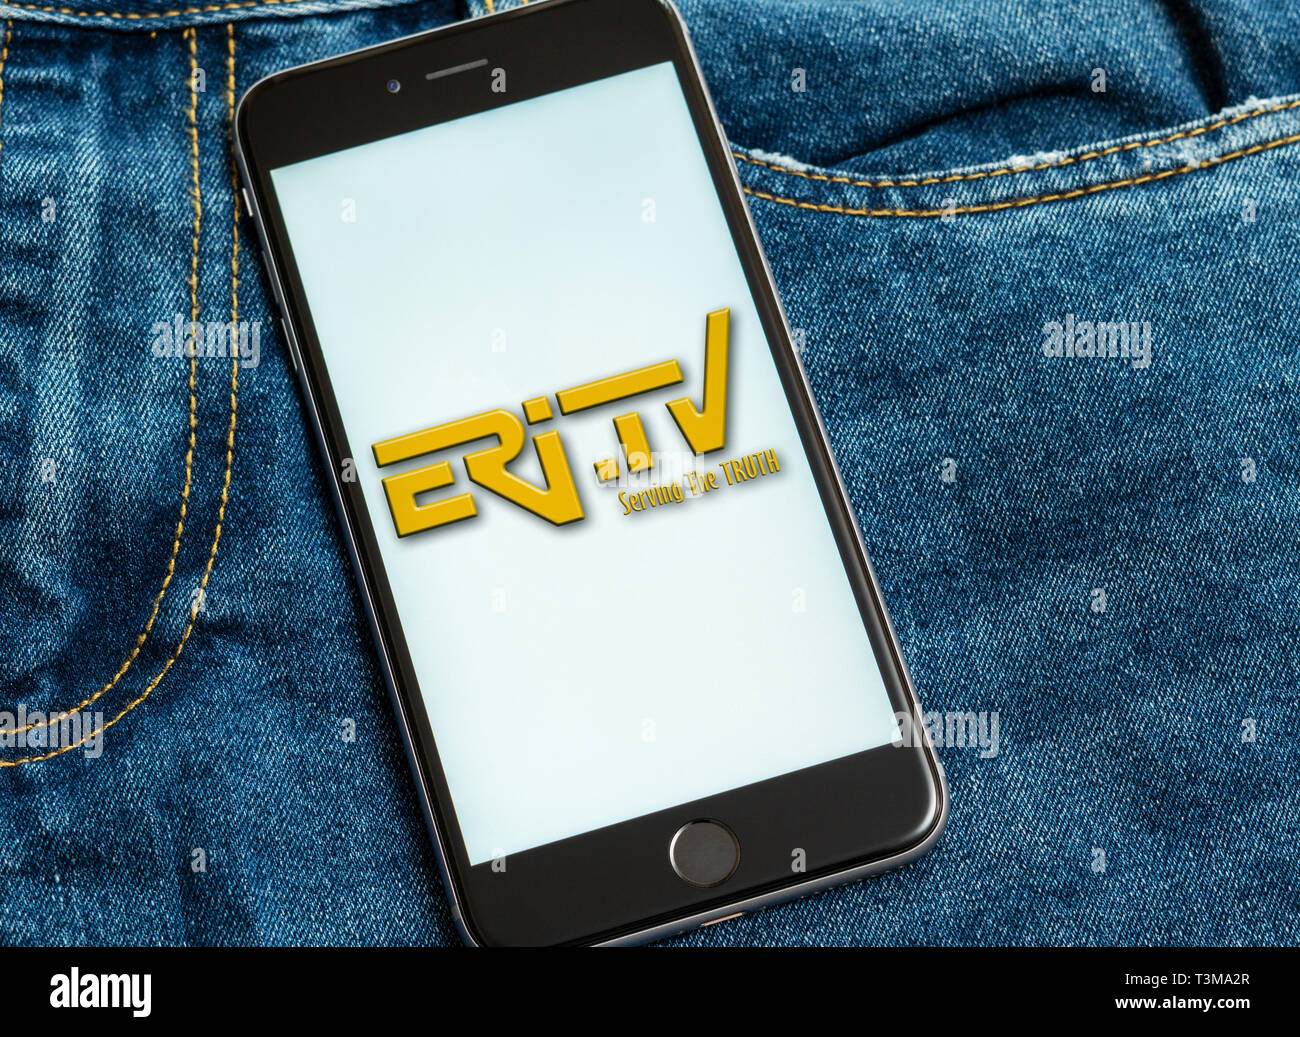 Black phone with logo of news media Eritrean Television (Eri-TV) on the screen. News media icon. Denim jeans background. Can be used as illustrative Stock Photo